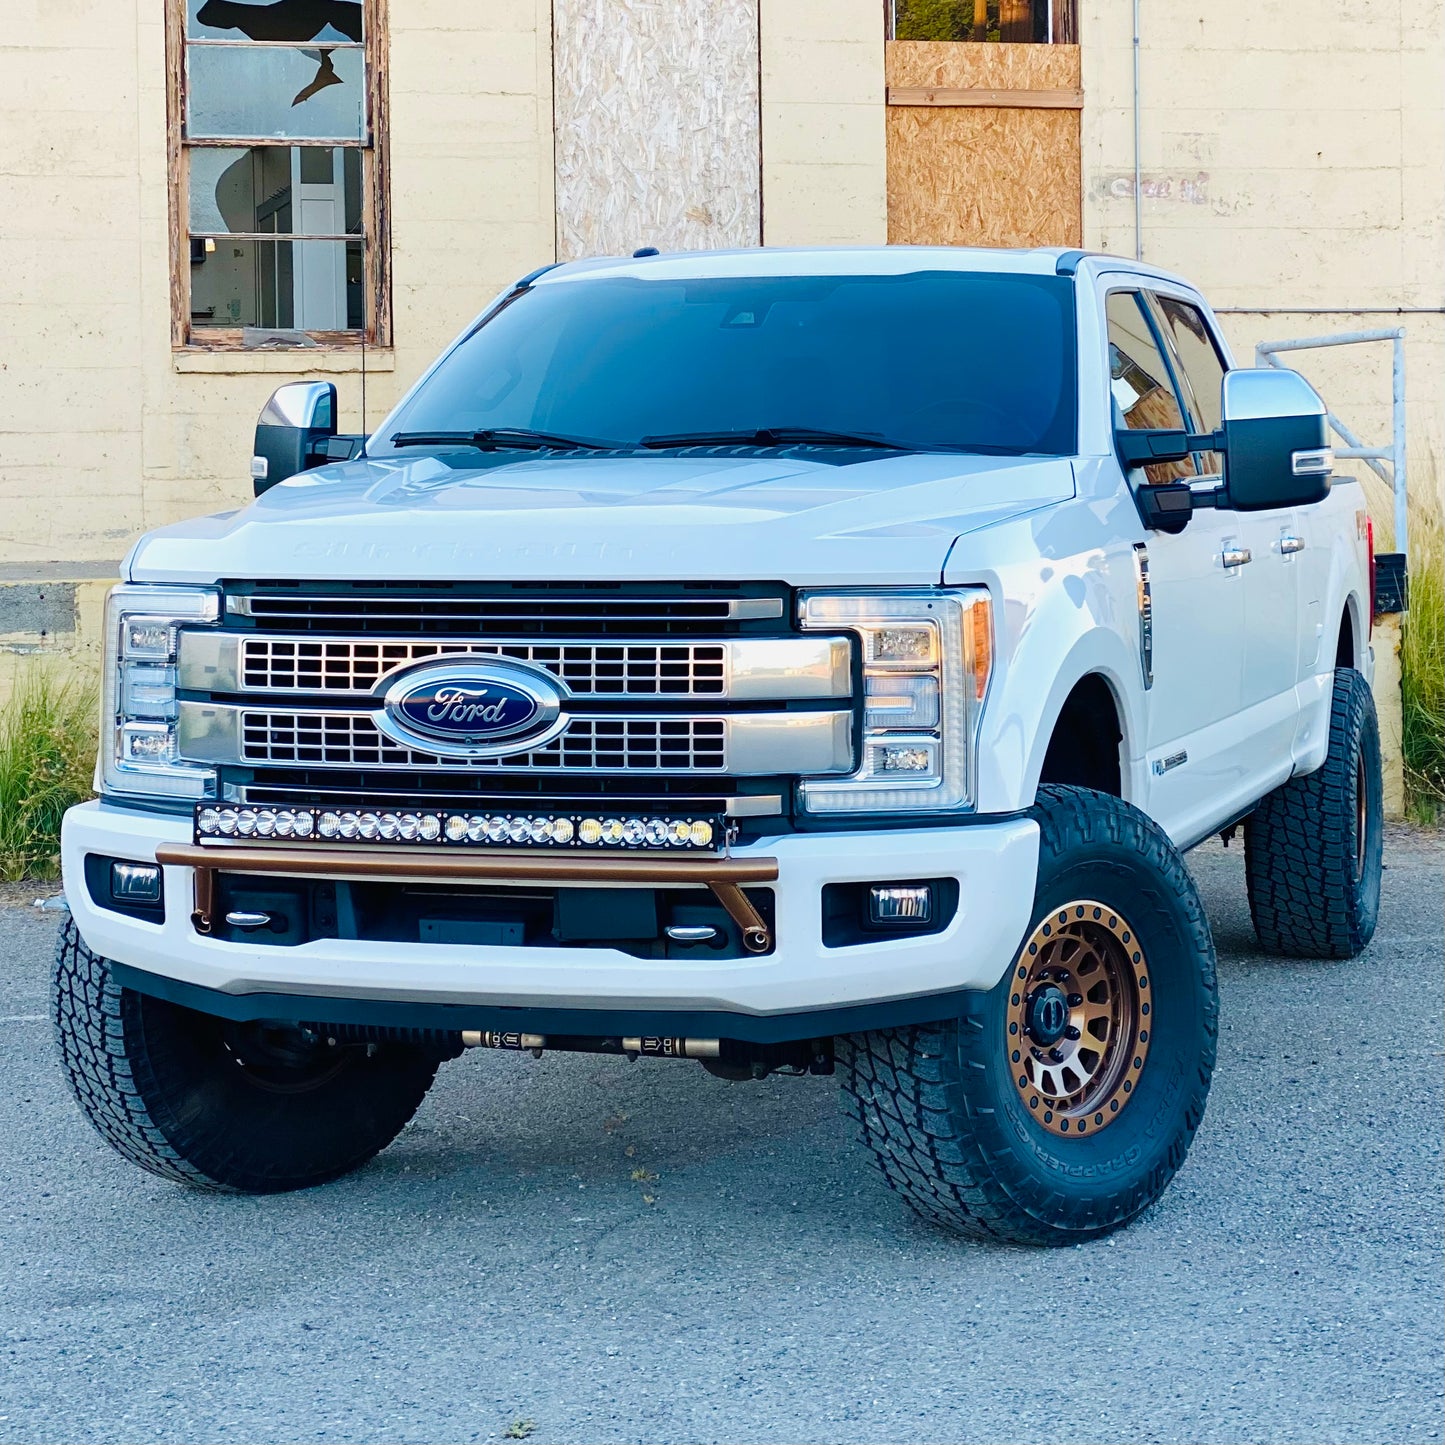 Ford Super-duty light bar F-250 F-350 F-450 F-550 Light Bar off-road overland expeditions truck parts LED LP9  accessories 2017 2018 2019 2020 2021 2022 2023